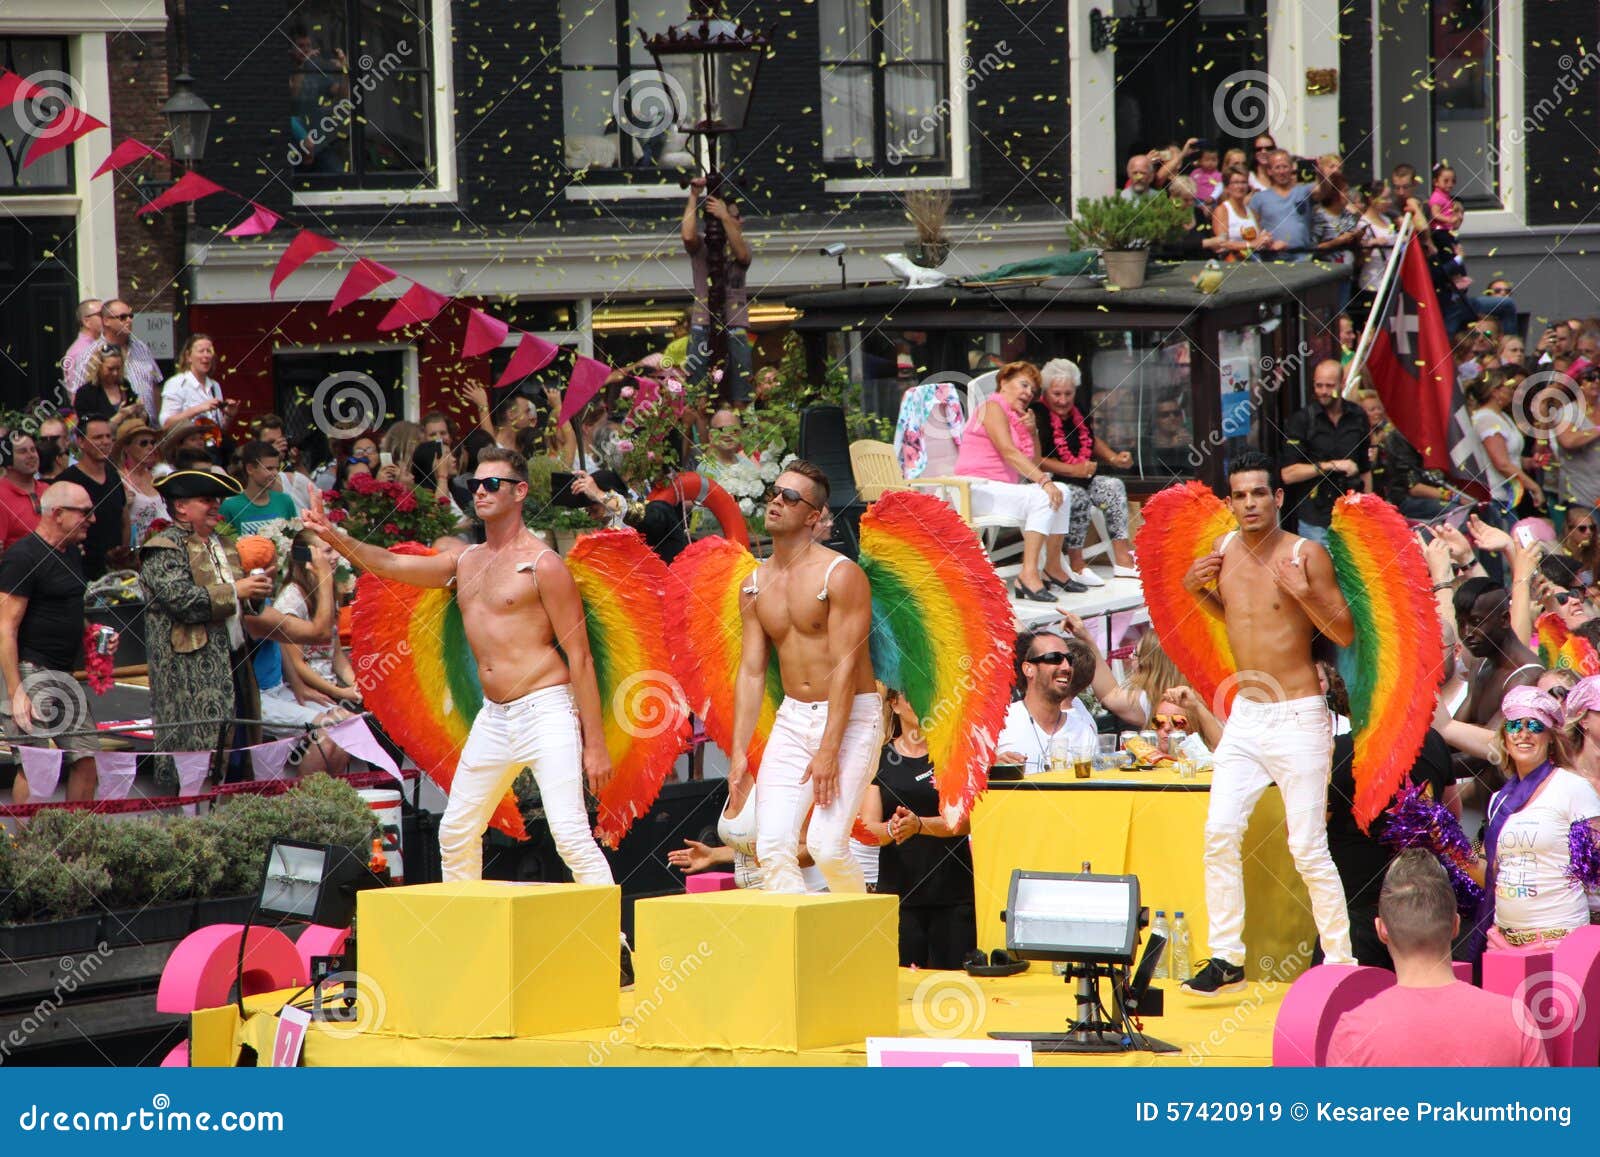 Amsterdam Gay Pride Canal Parade Editorial Stock Image Image Of Boat Lgbt 57420919